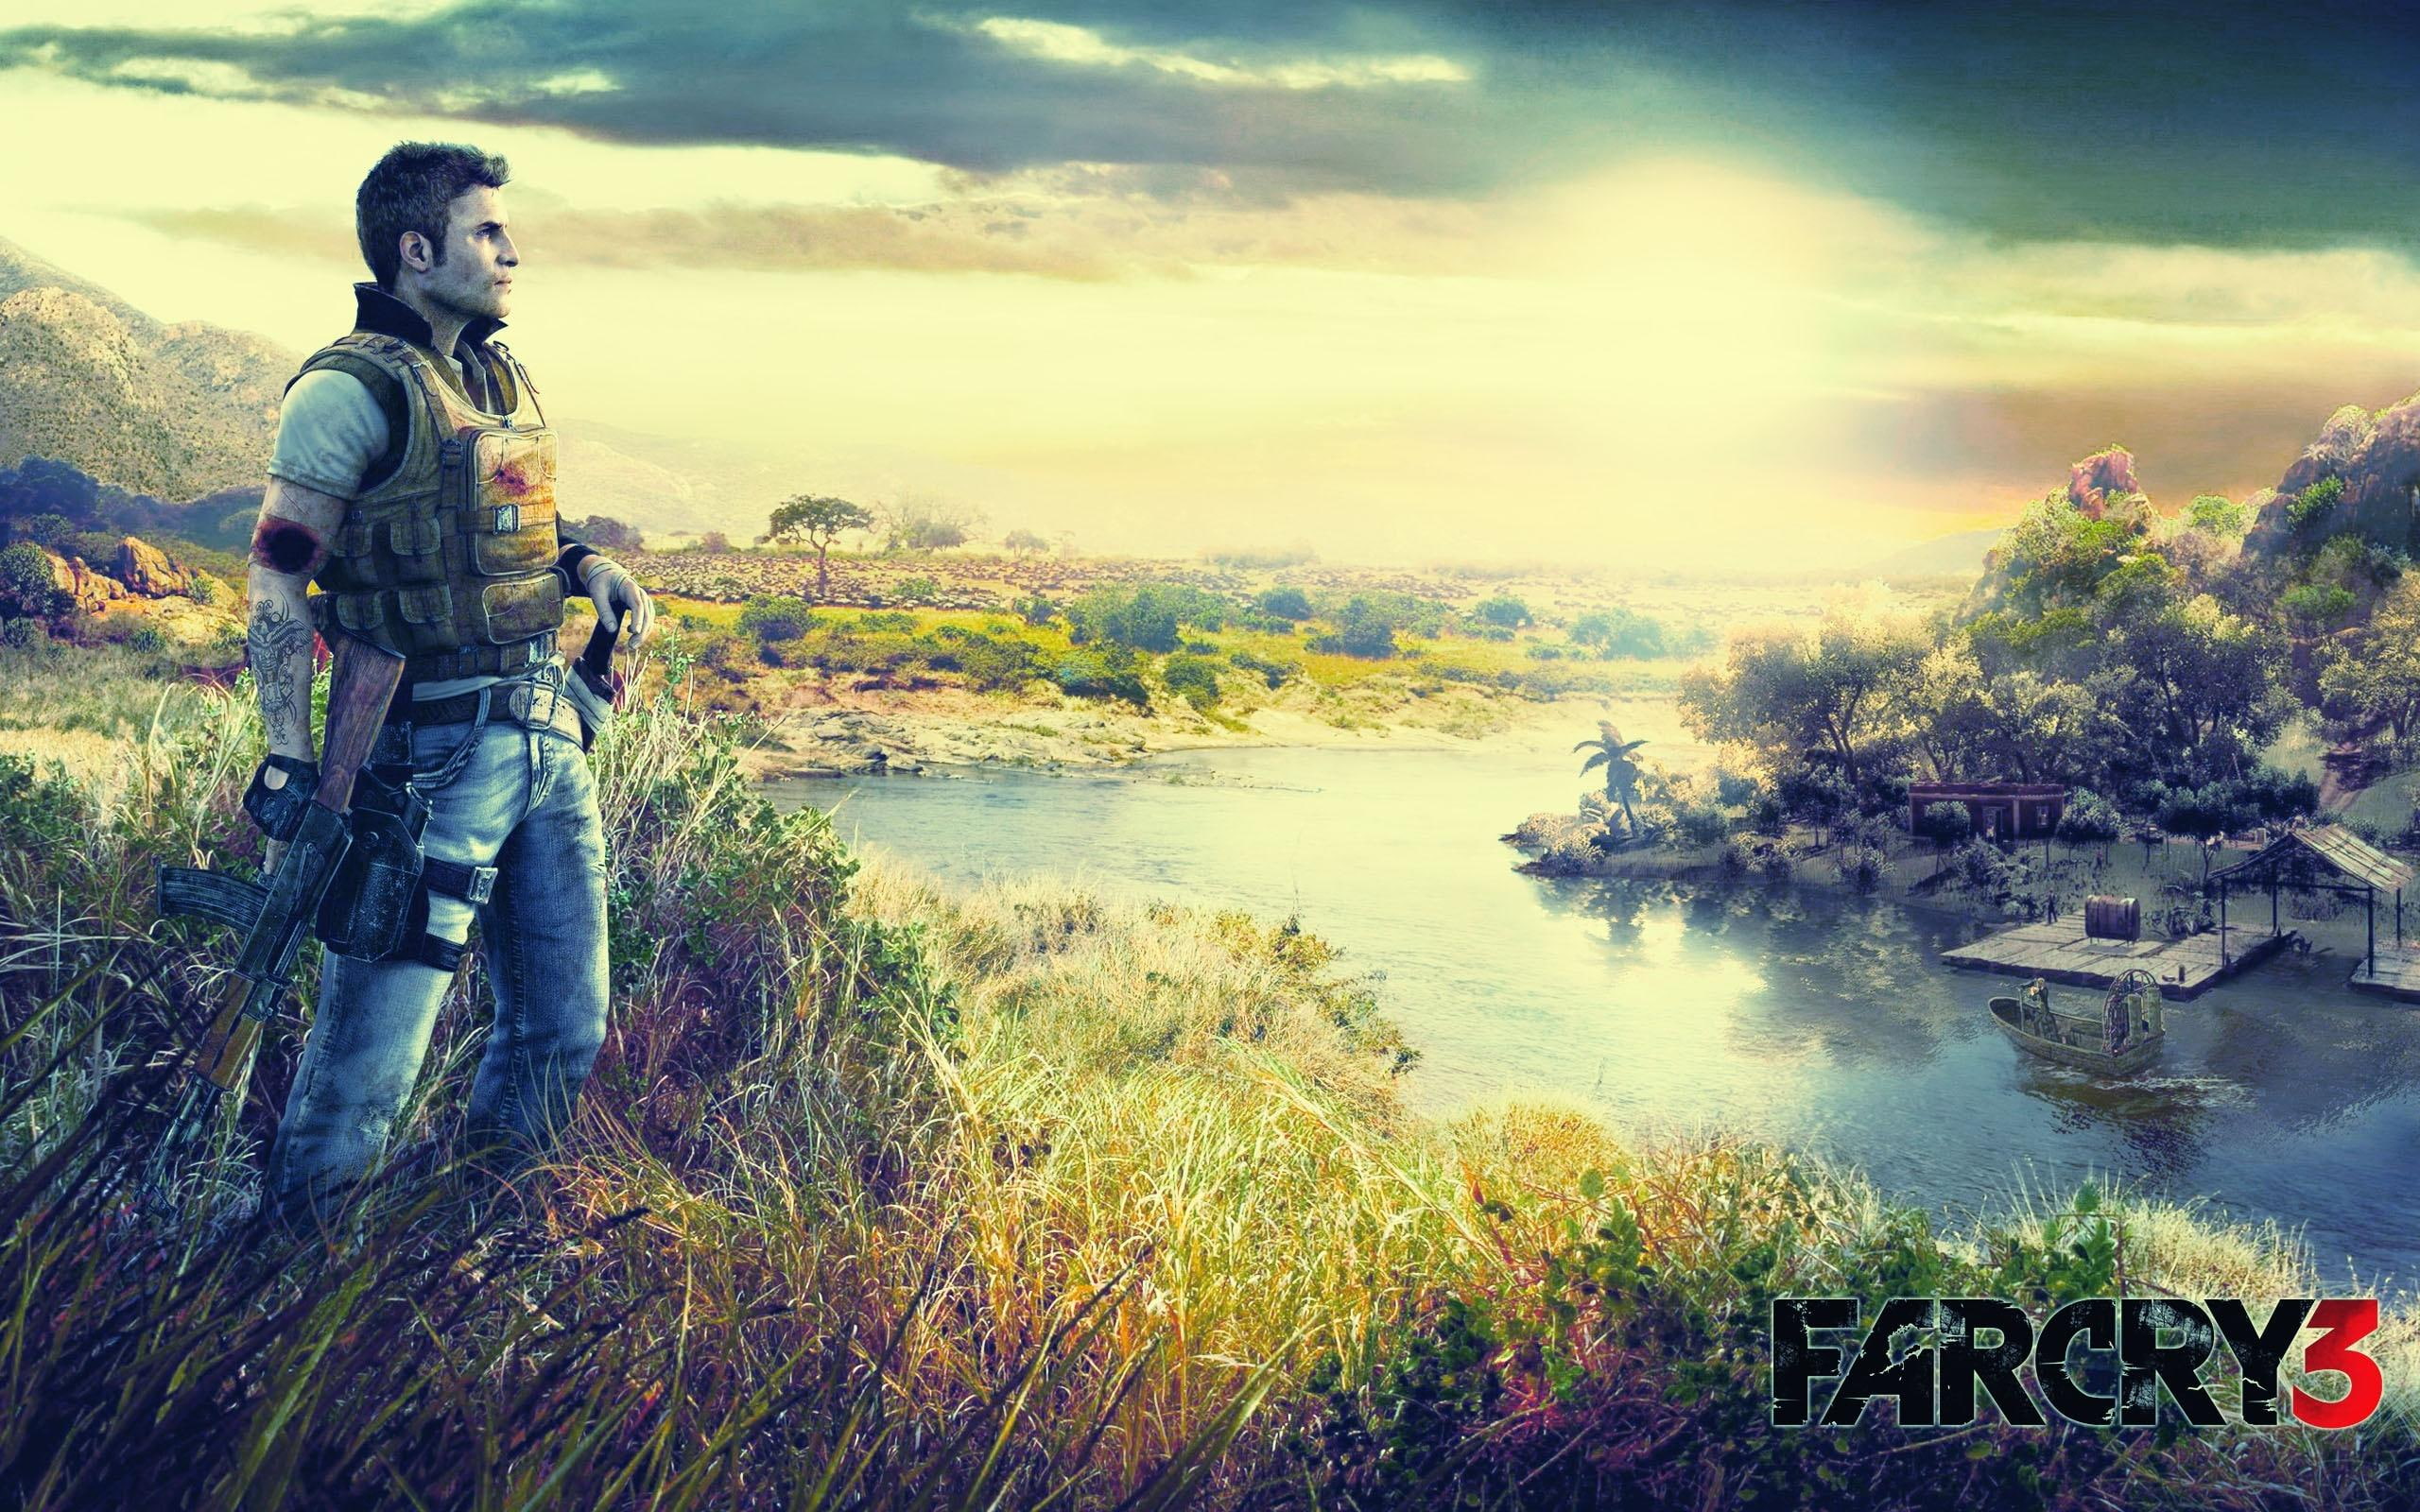 2012 Far Cry 3, farcry 3 game poster, games